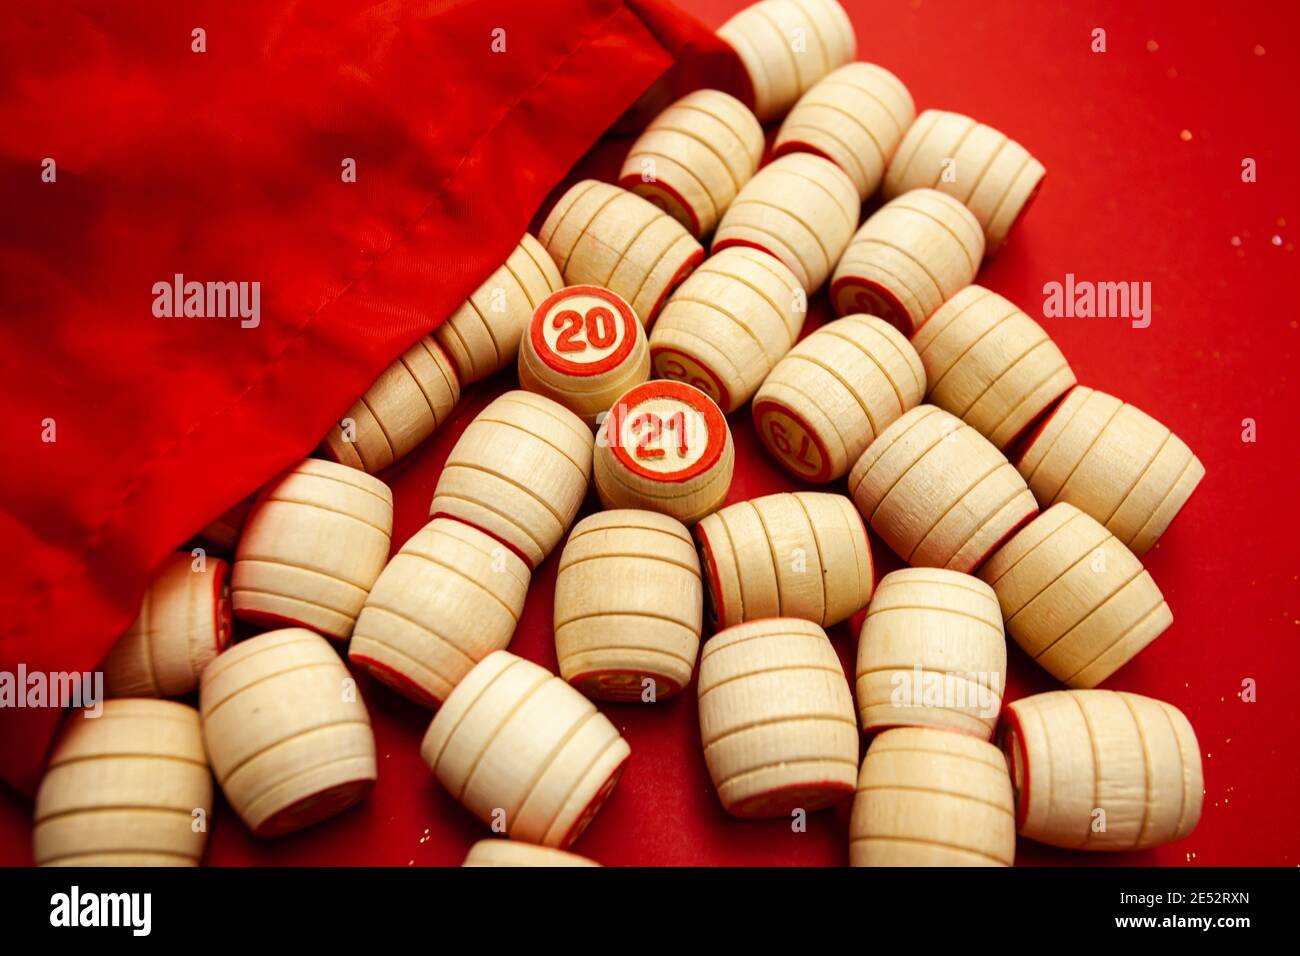 Wooden bingo kegs, on a red background in a red bag, for playing bingo. A way to spend time at home. 2021 Stock Photo